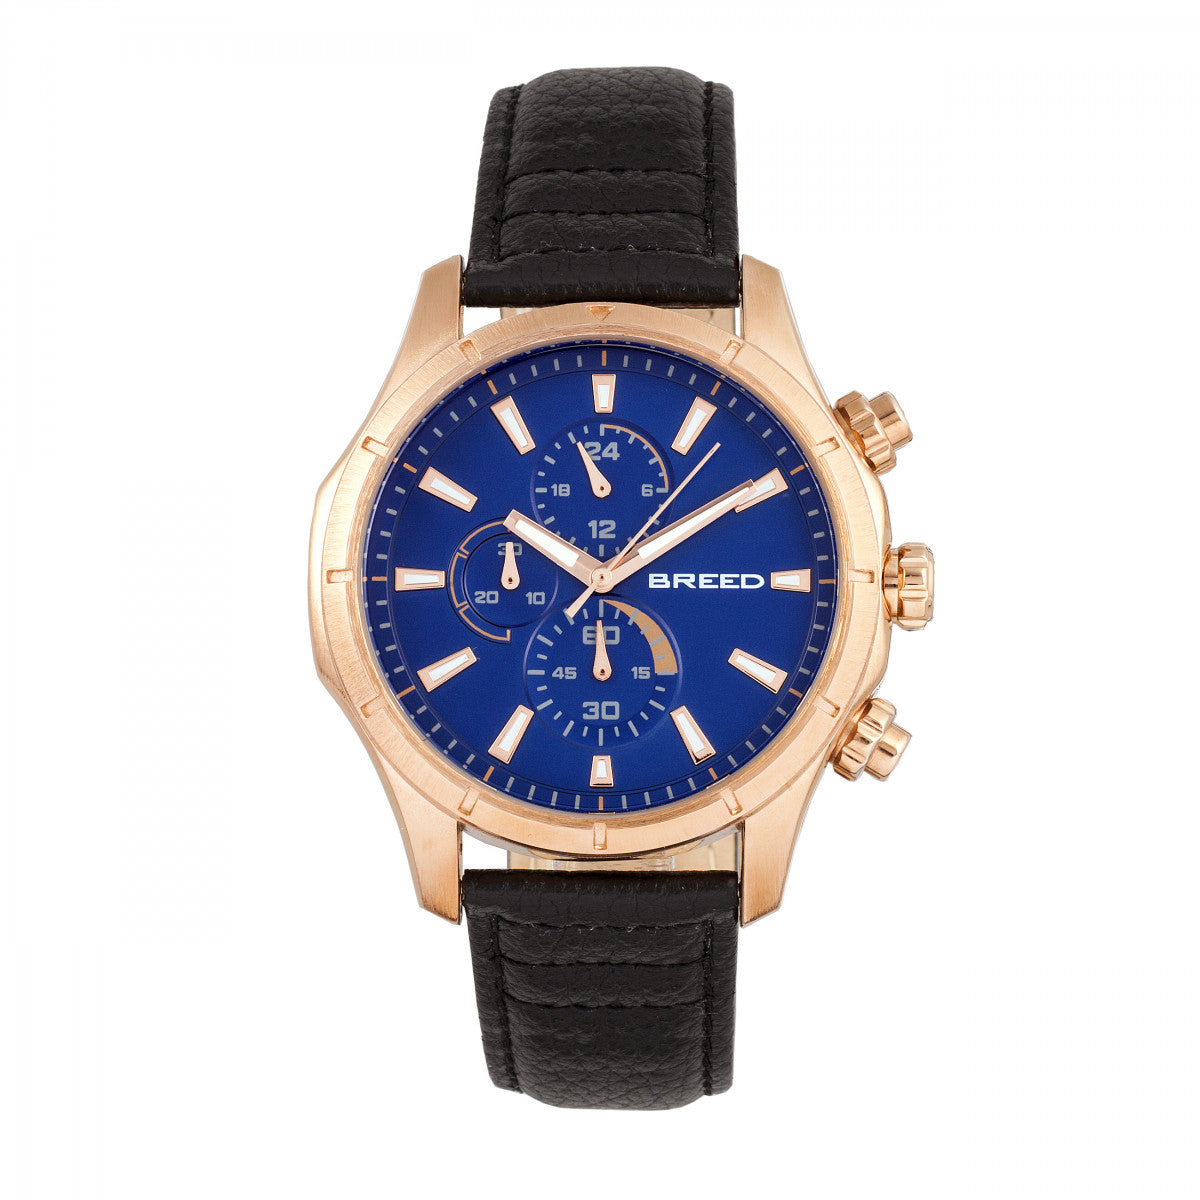 Breed Lacroix Chronograph Leather-Band Watch - Rose Gold/Black - BRD6803